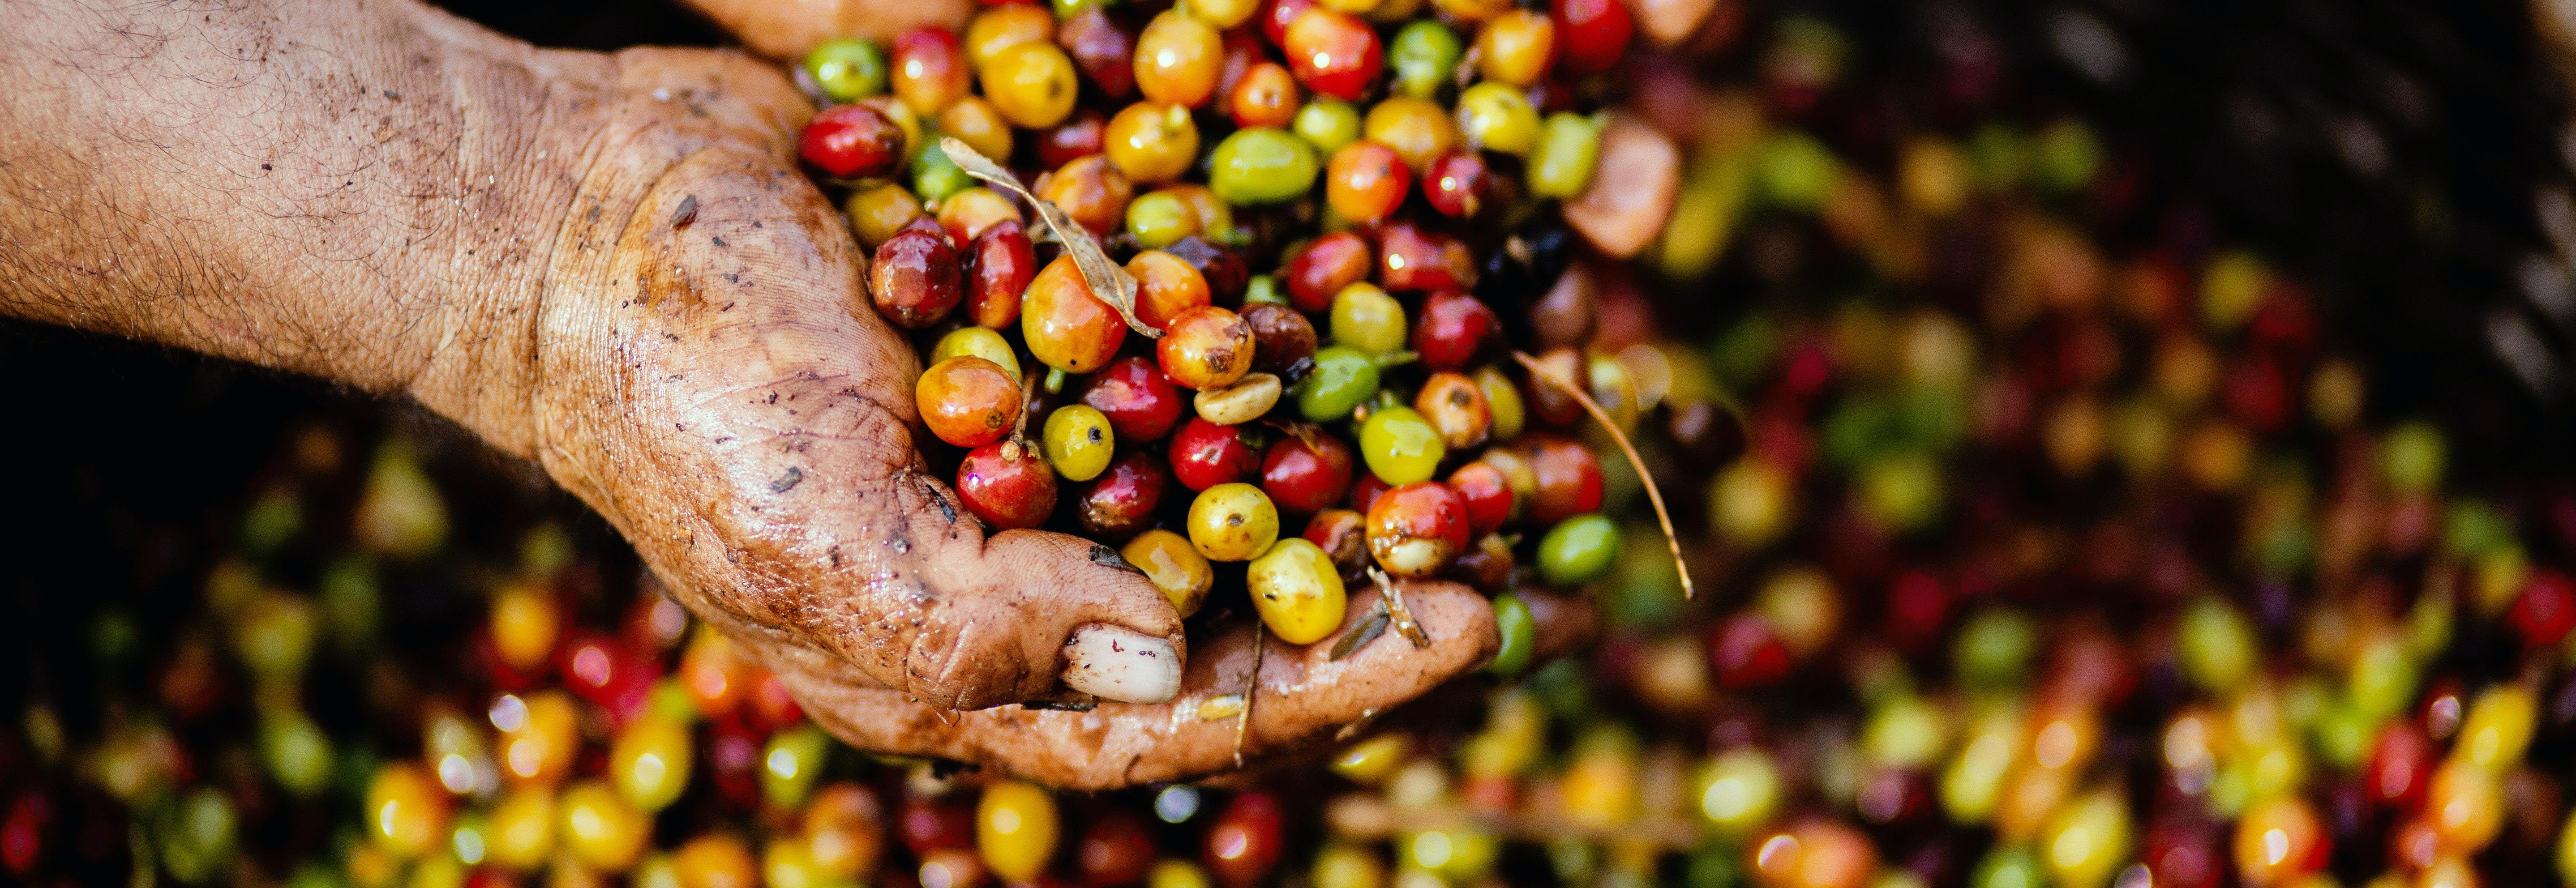 Image of hands holding coffee cherries.